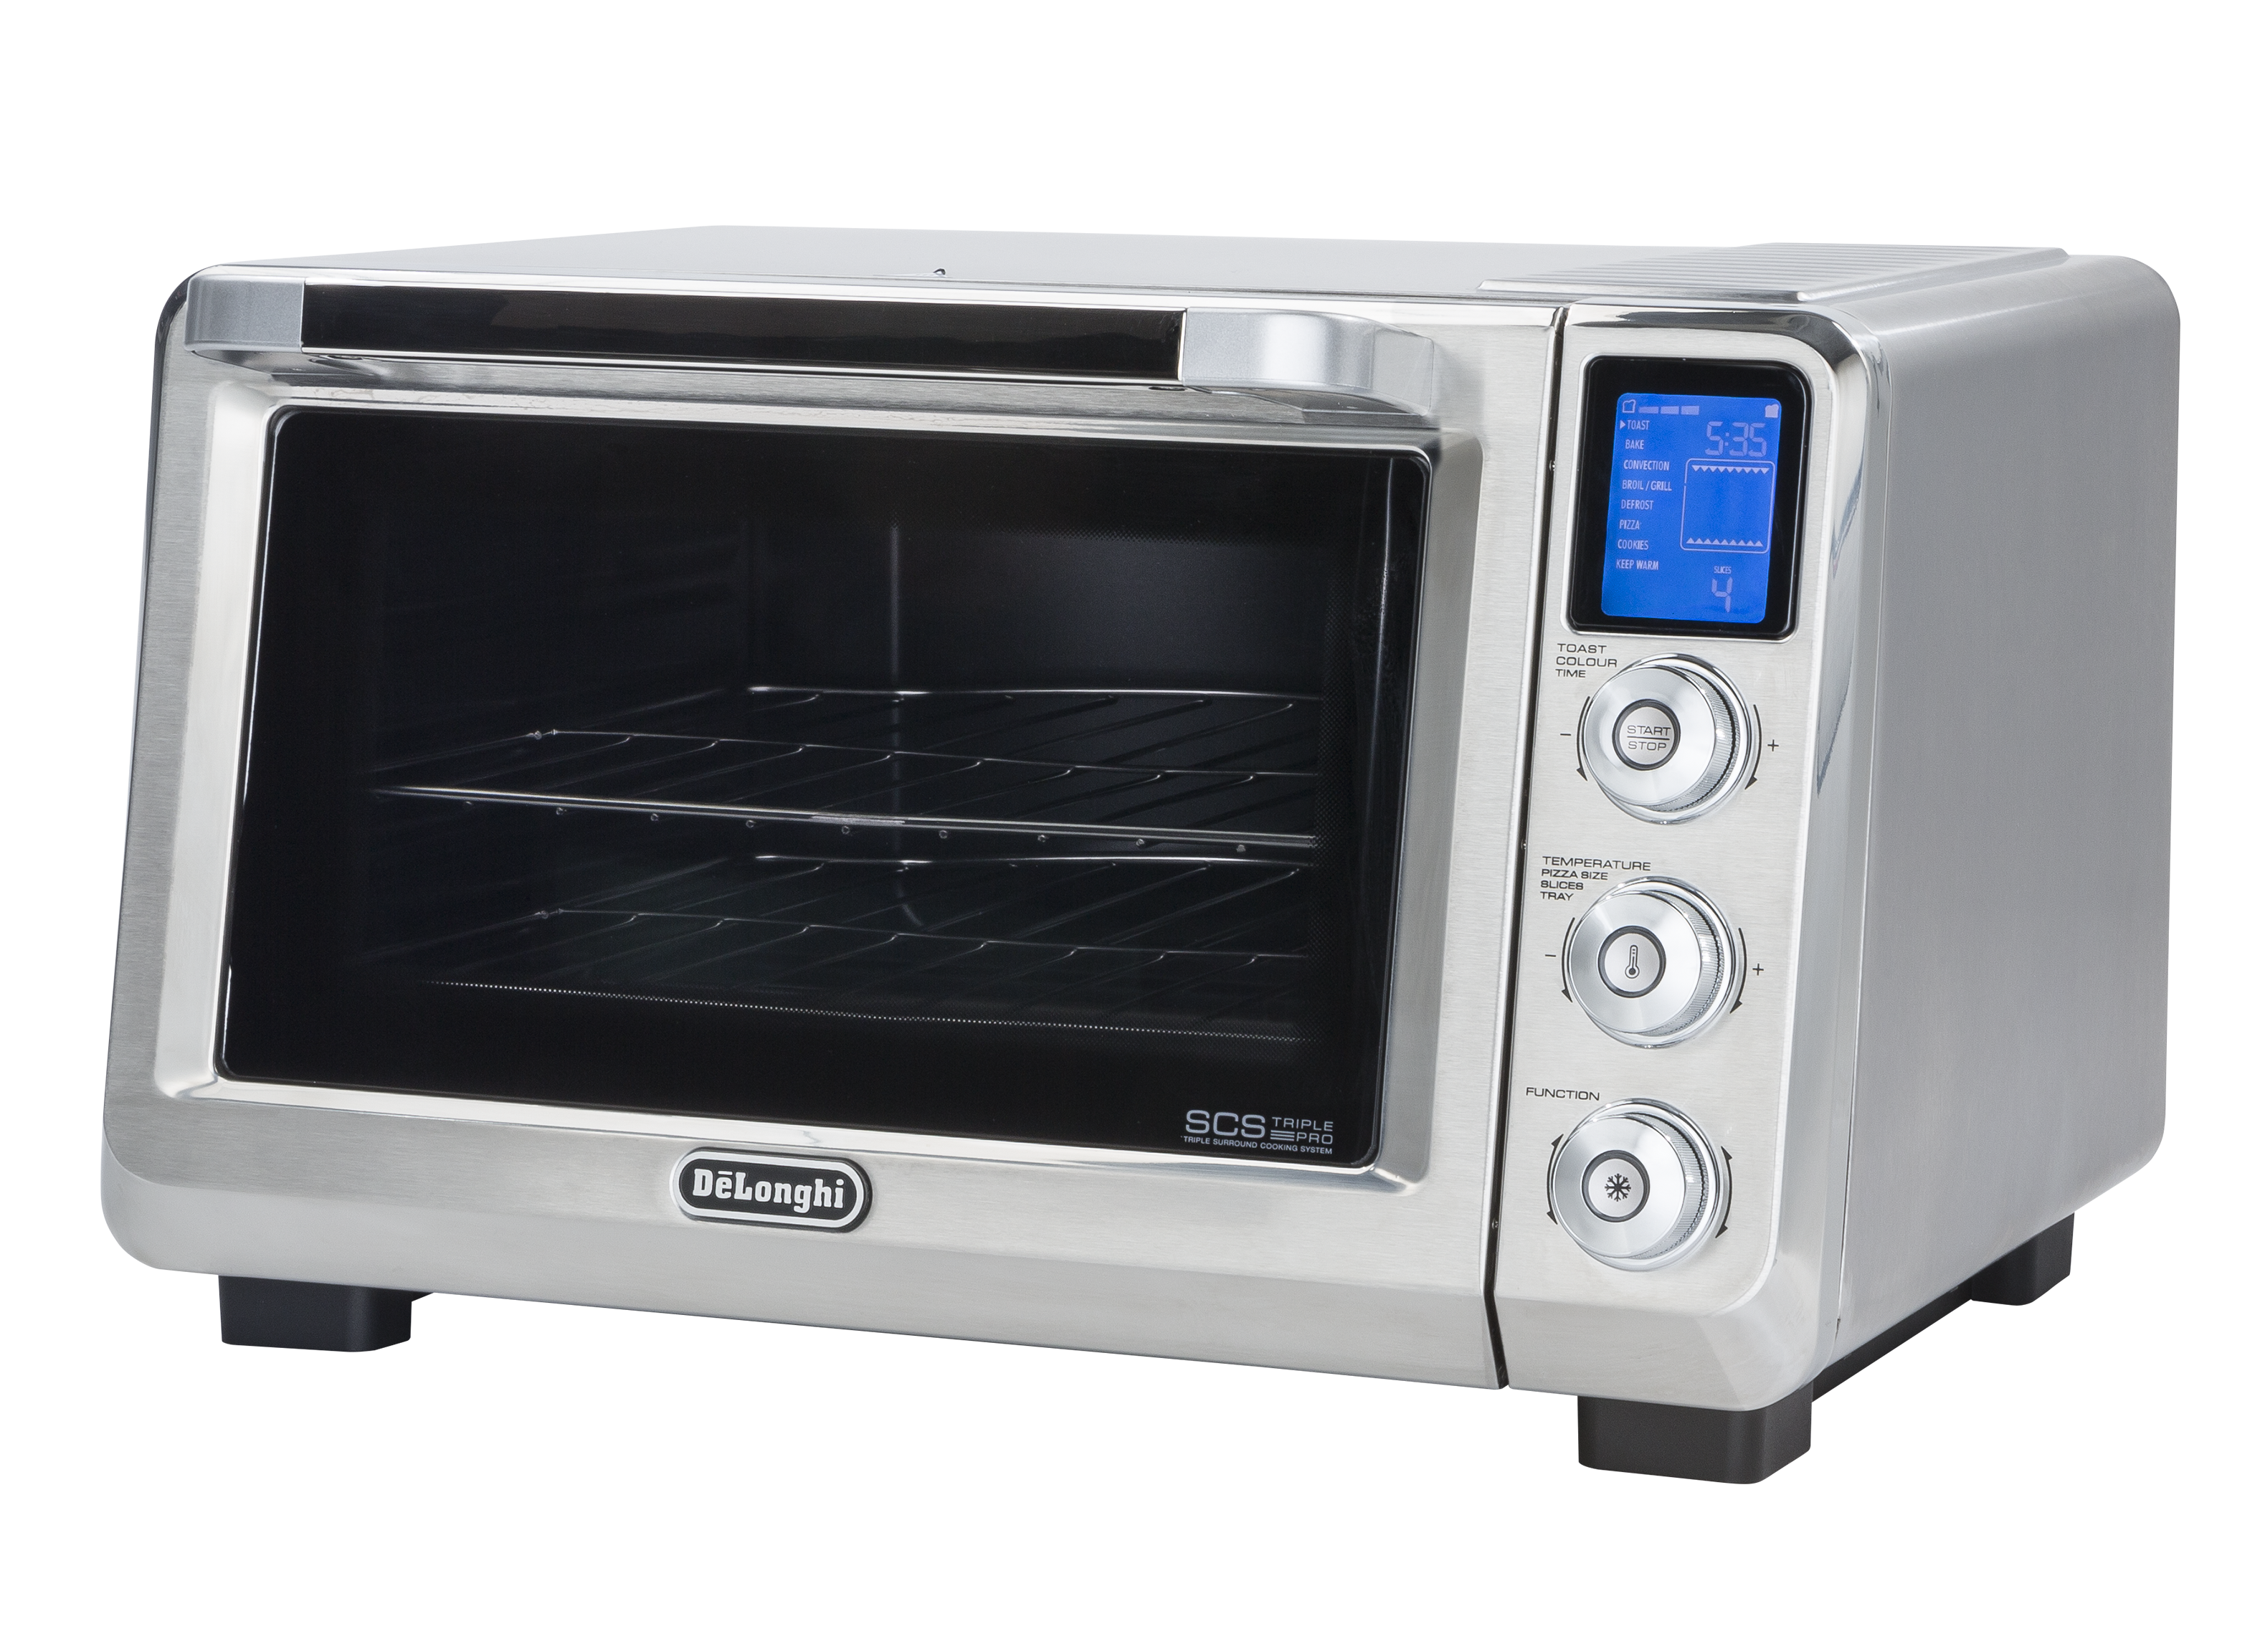 DeLonghi Livenza EO241250M Toaster & Toaster Oven Review - Consumer Reports